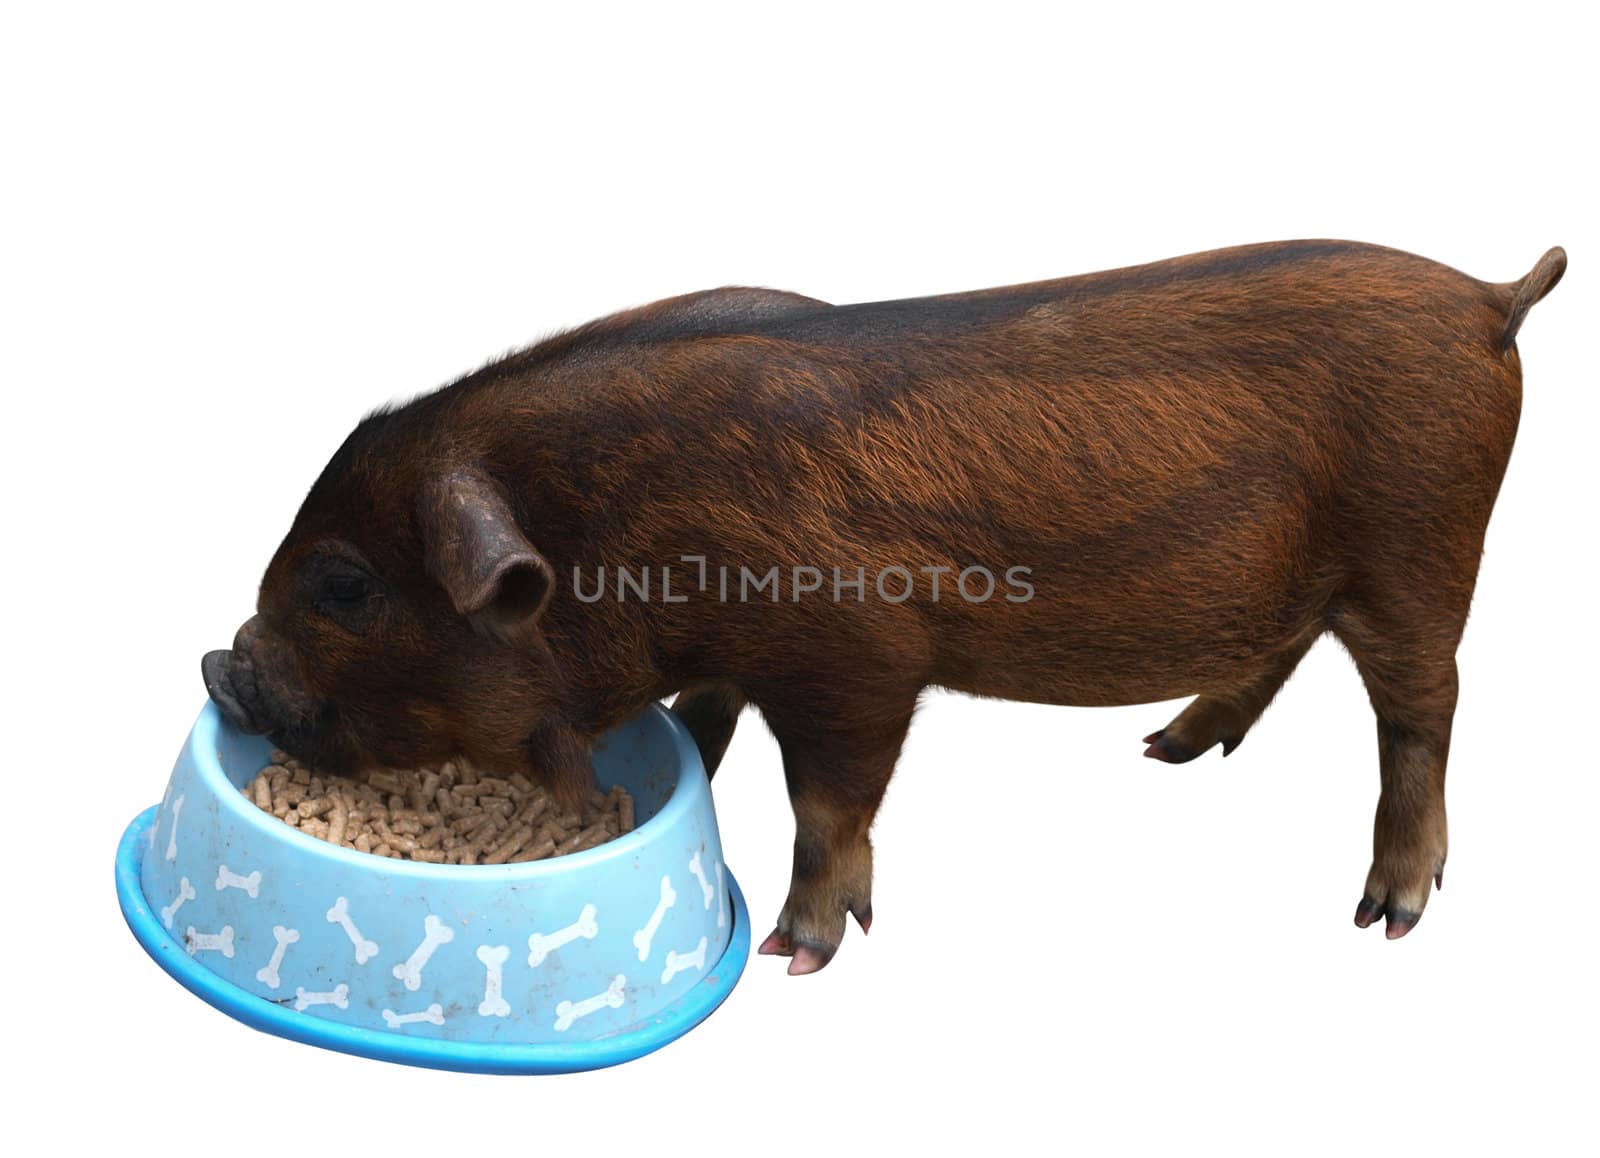 Lady Gruntsalot, a Kune kune Piglet eating from a bowl Isolated with clipping path